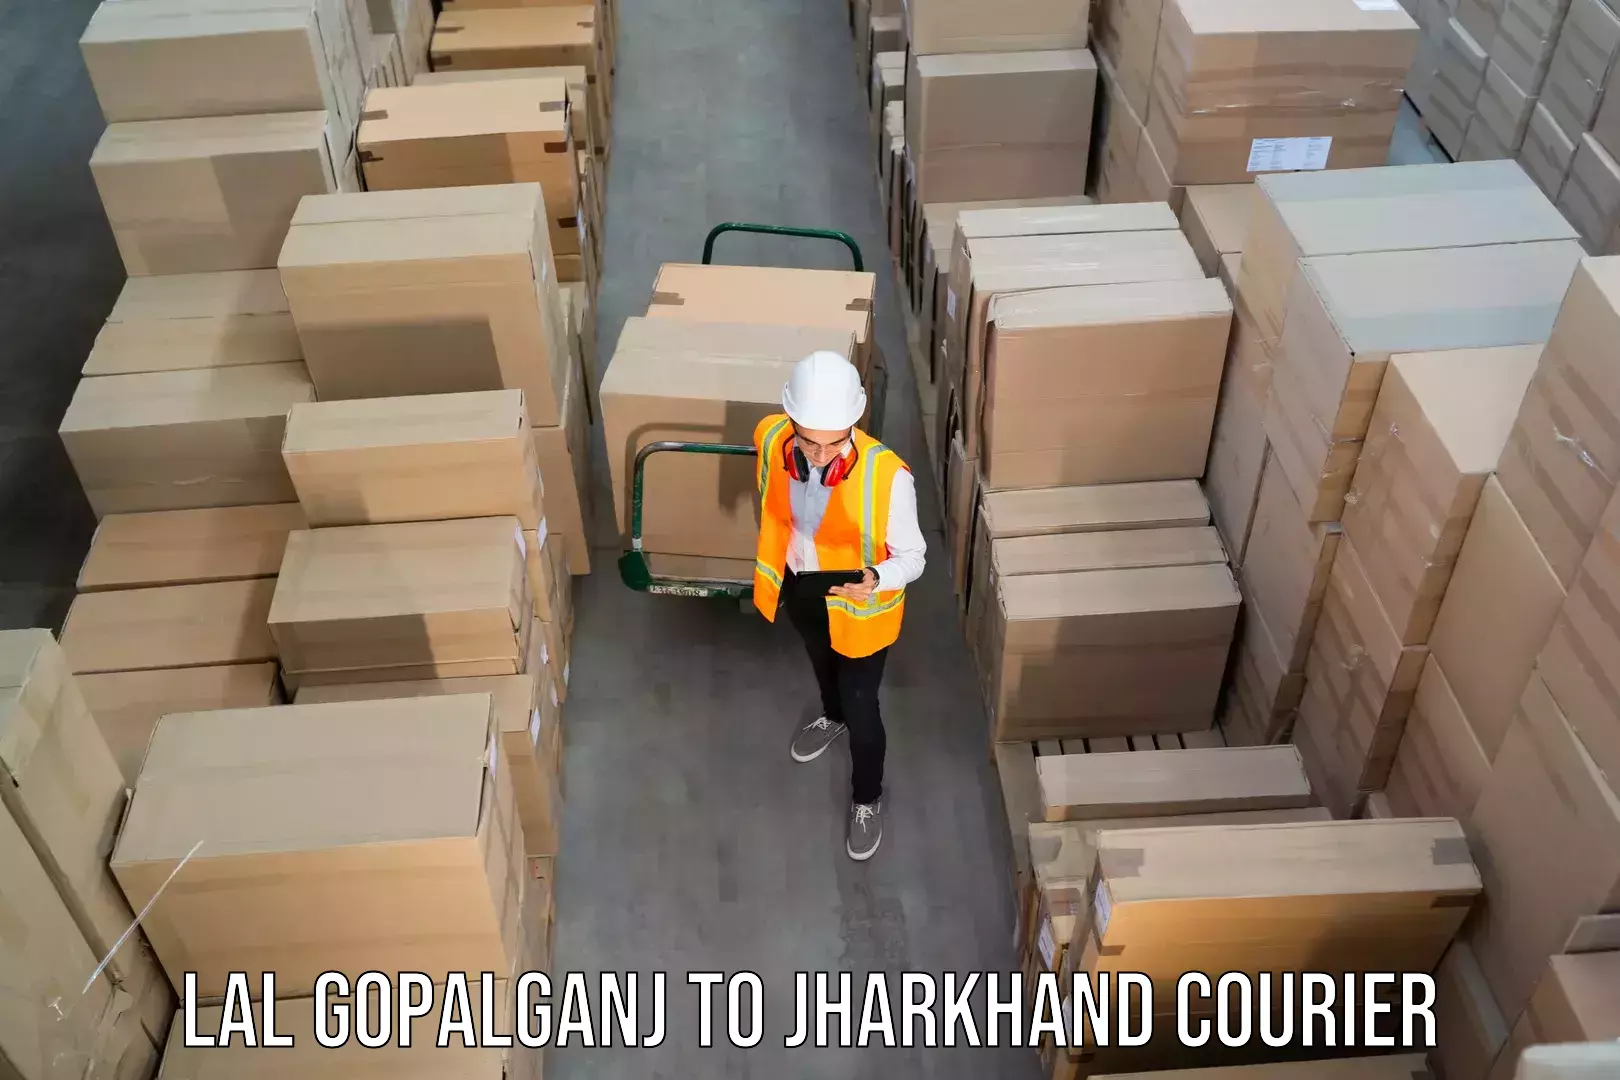 Multi-national courier services Lal Gopalganj to Topchanchi